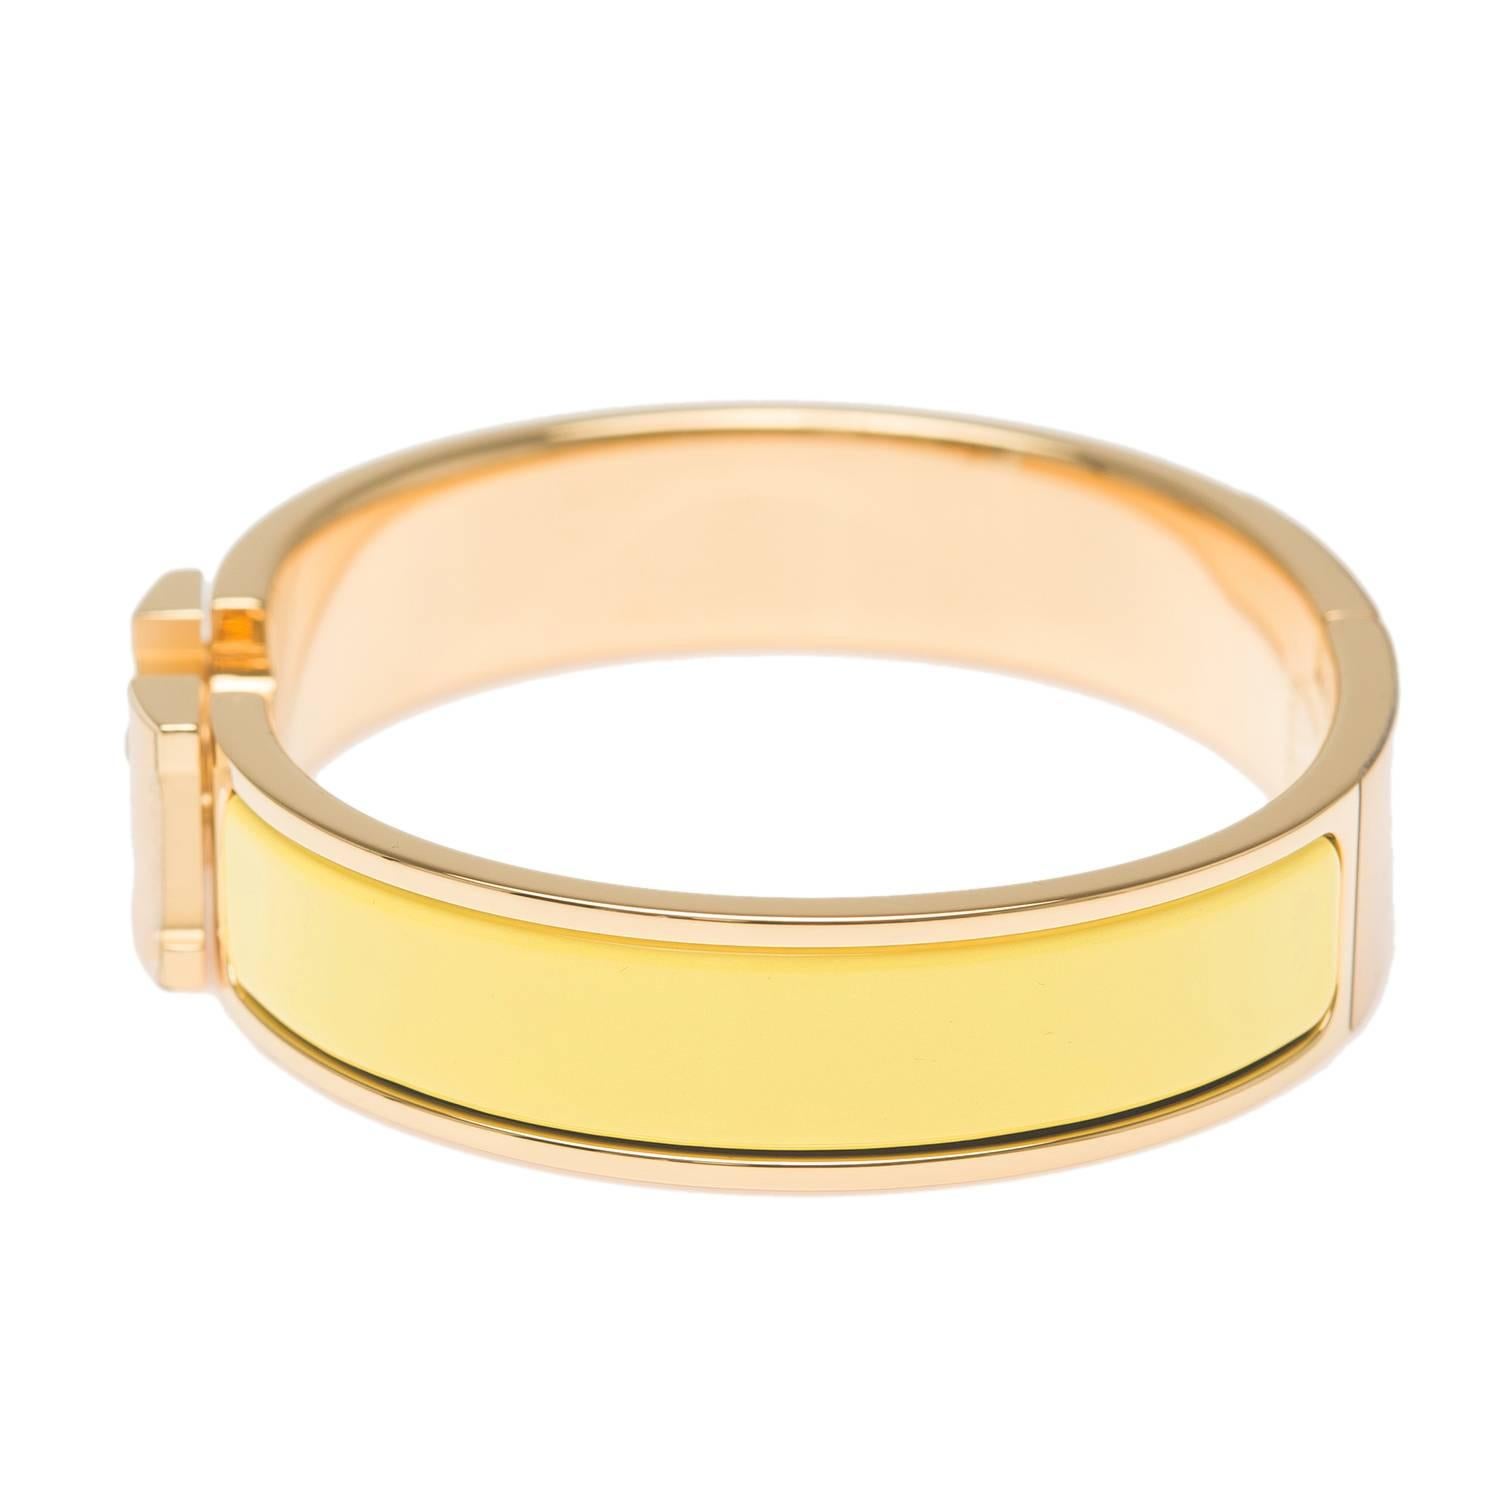 Hermes narrow Clic Clac H bracelet in Jaune Citron enamel closure with gold plated hardware in size PM.

Origin: France

Condition: Pristine; never worn

Accompanied by: Hermes box, Hermes dustbag, carebook

Measurements: Diameter: 2.25